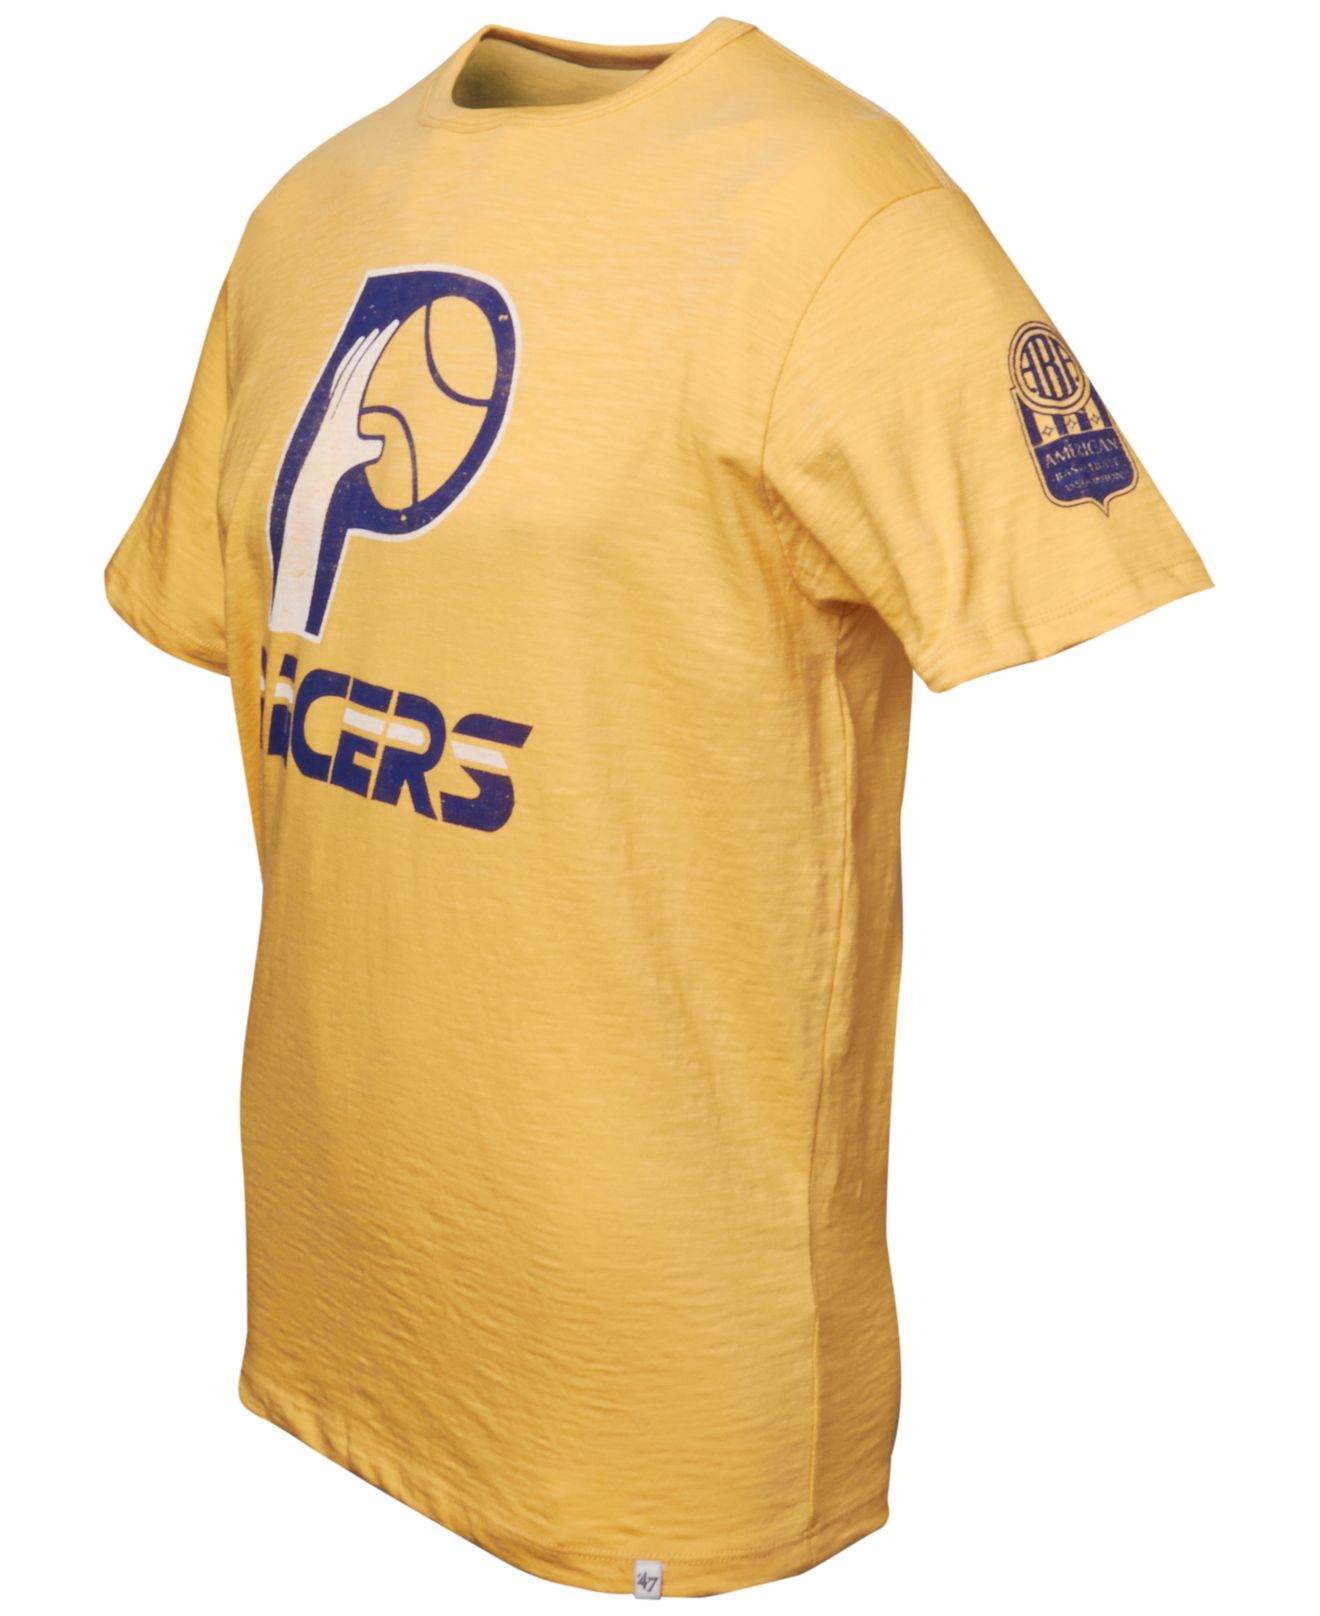 Lyst 47 Brand Men's Indiana Pacers Logo Scrum Tshirt in Yellow for Men